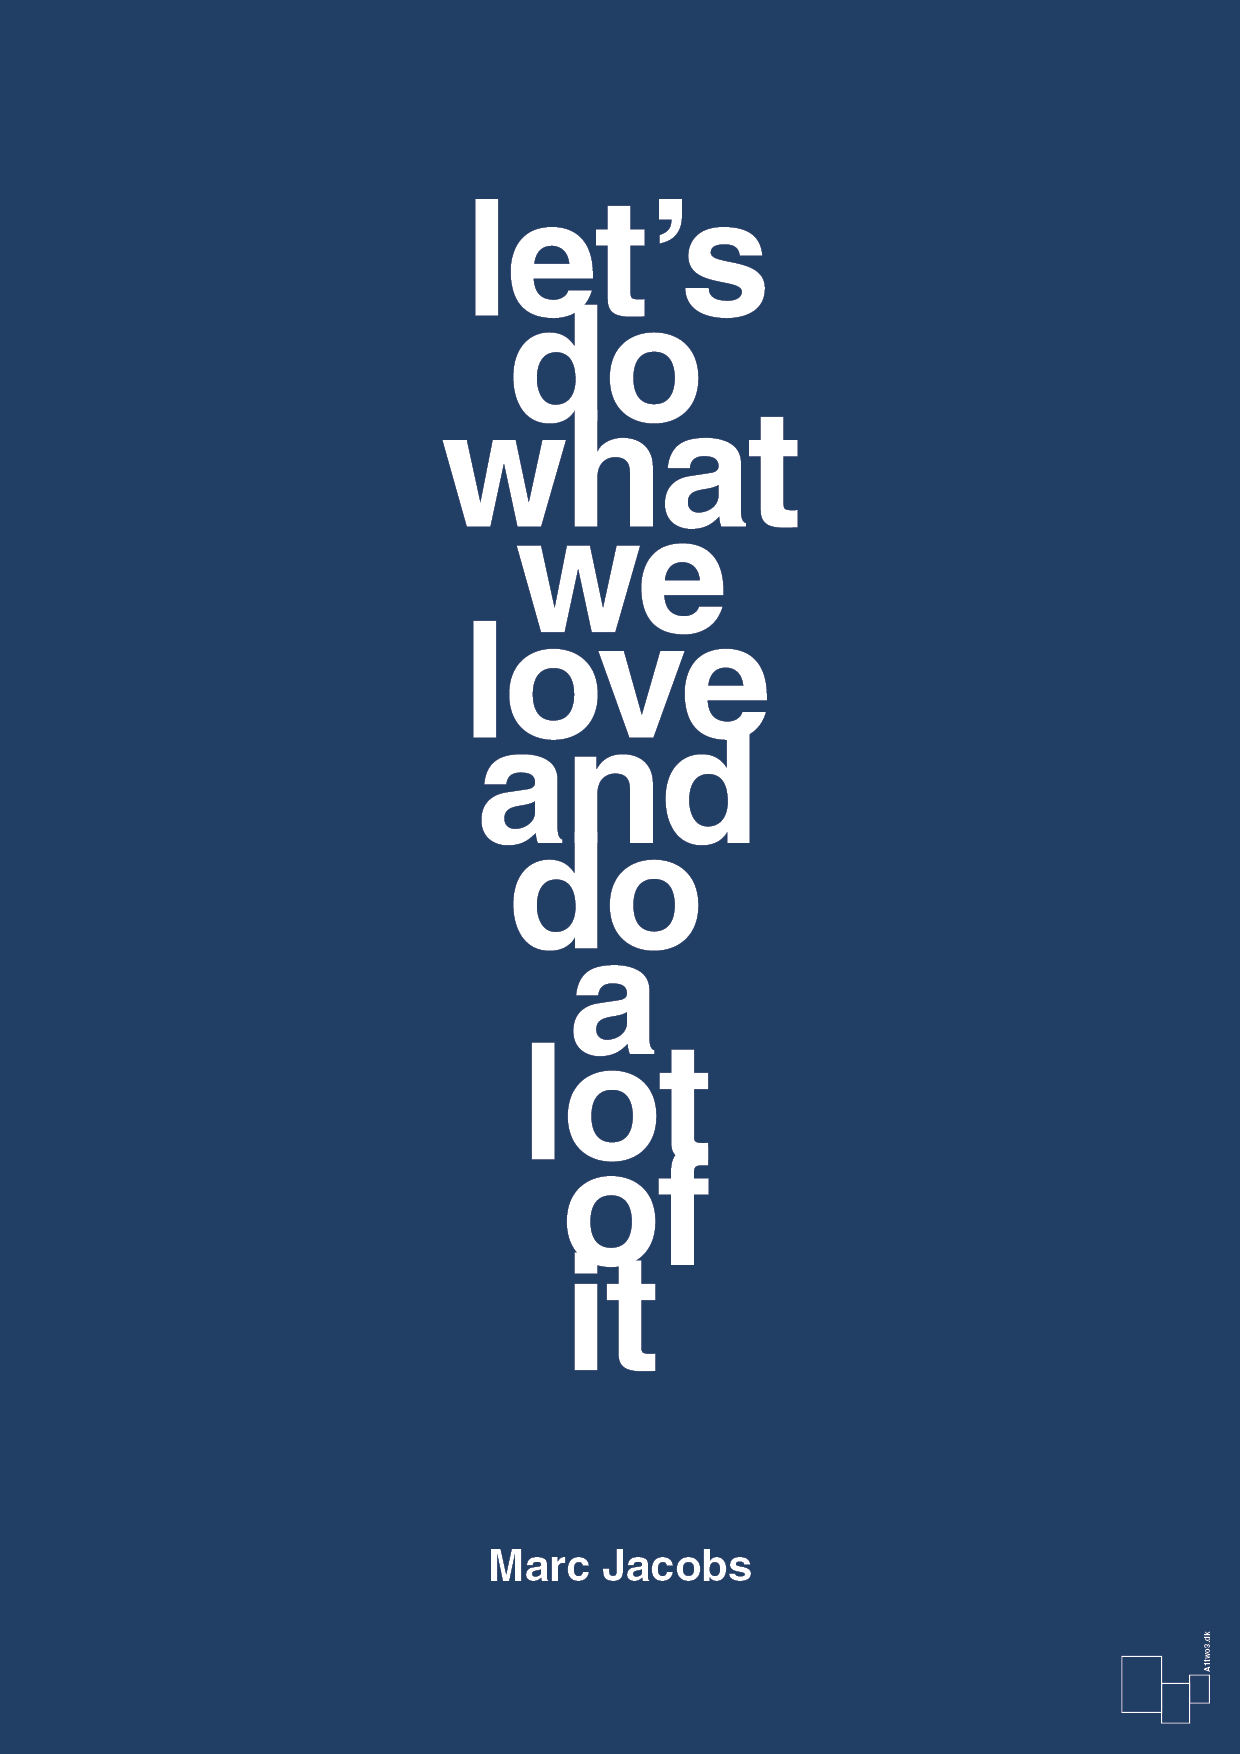 lets do what we love and do a lot of it - Plakat med Citater i Lapis Blue